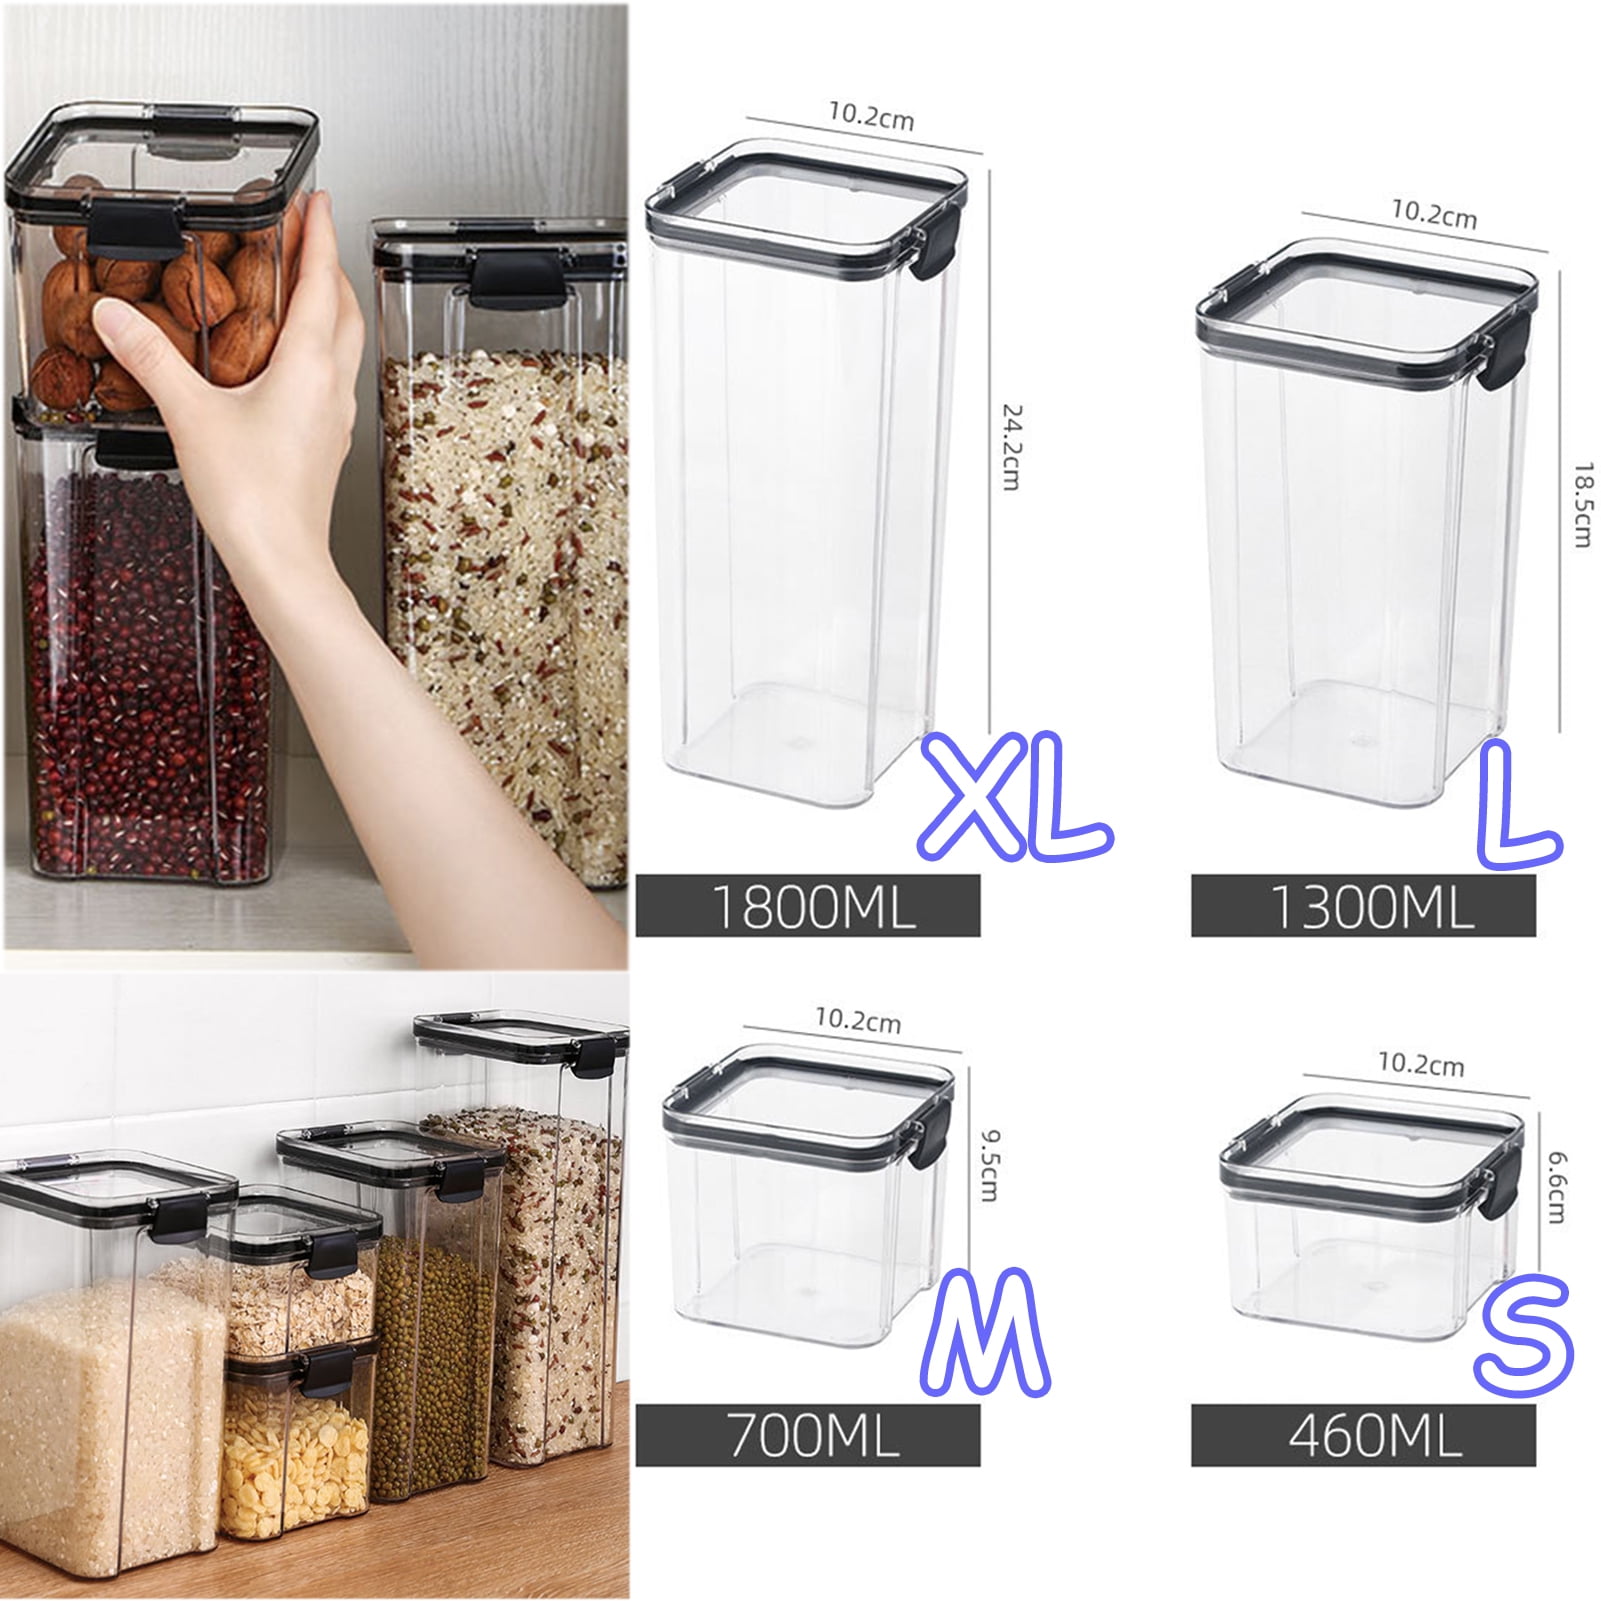 Walbest Airtight Moisture-proof Food Storage Container, BPA Free